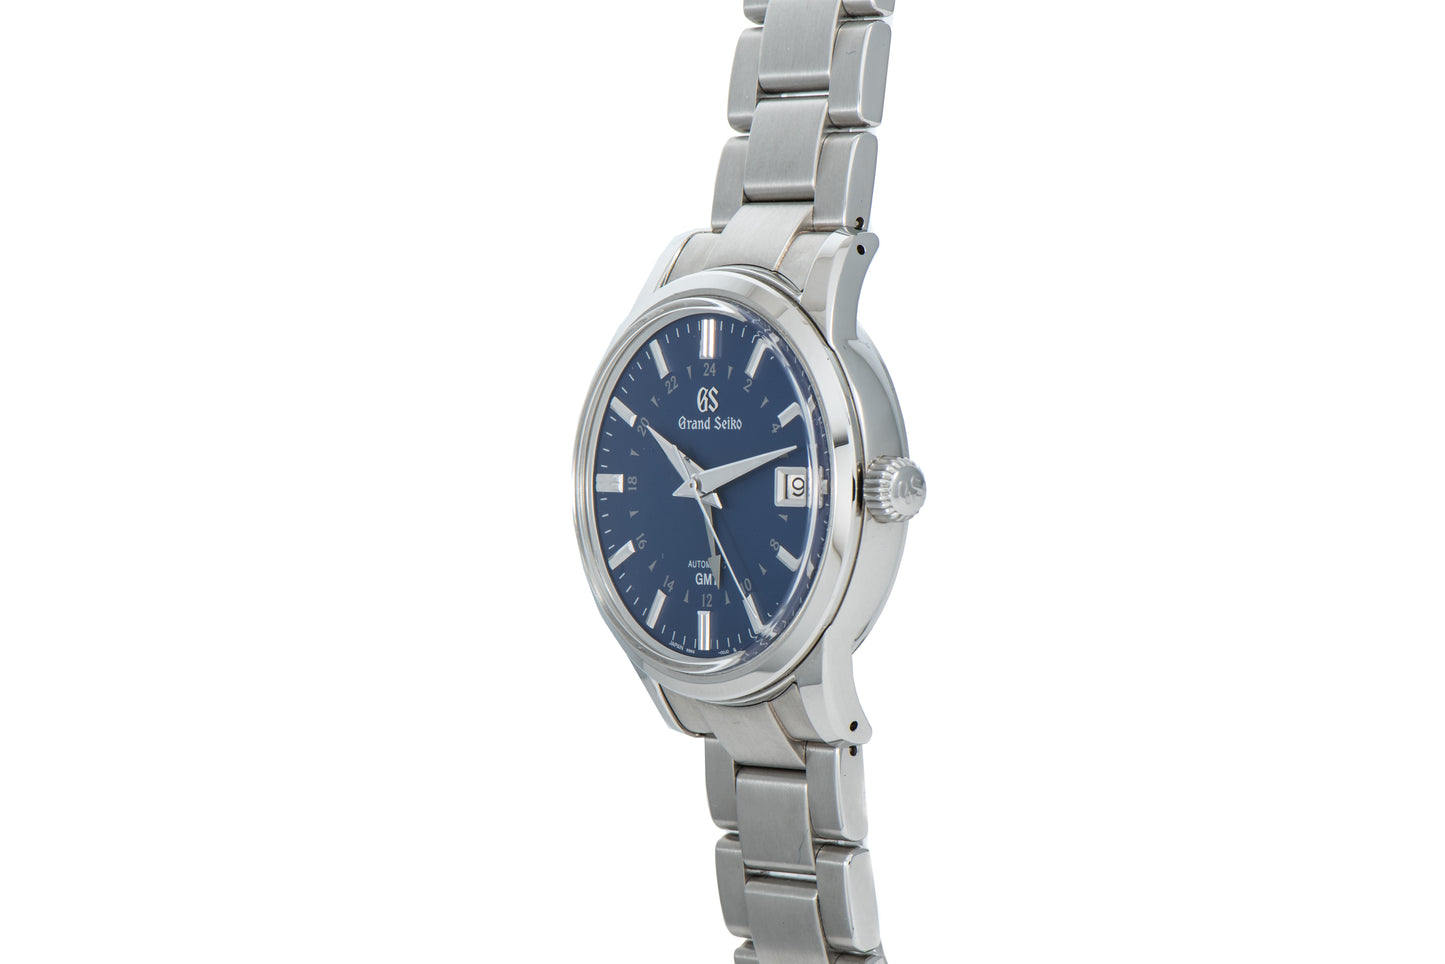 Grand Seiko Automatic GMT Limited Edition For HODINKEE